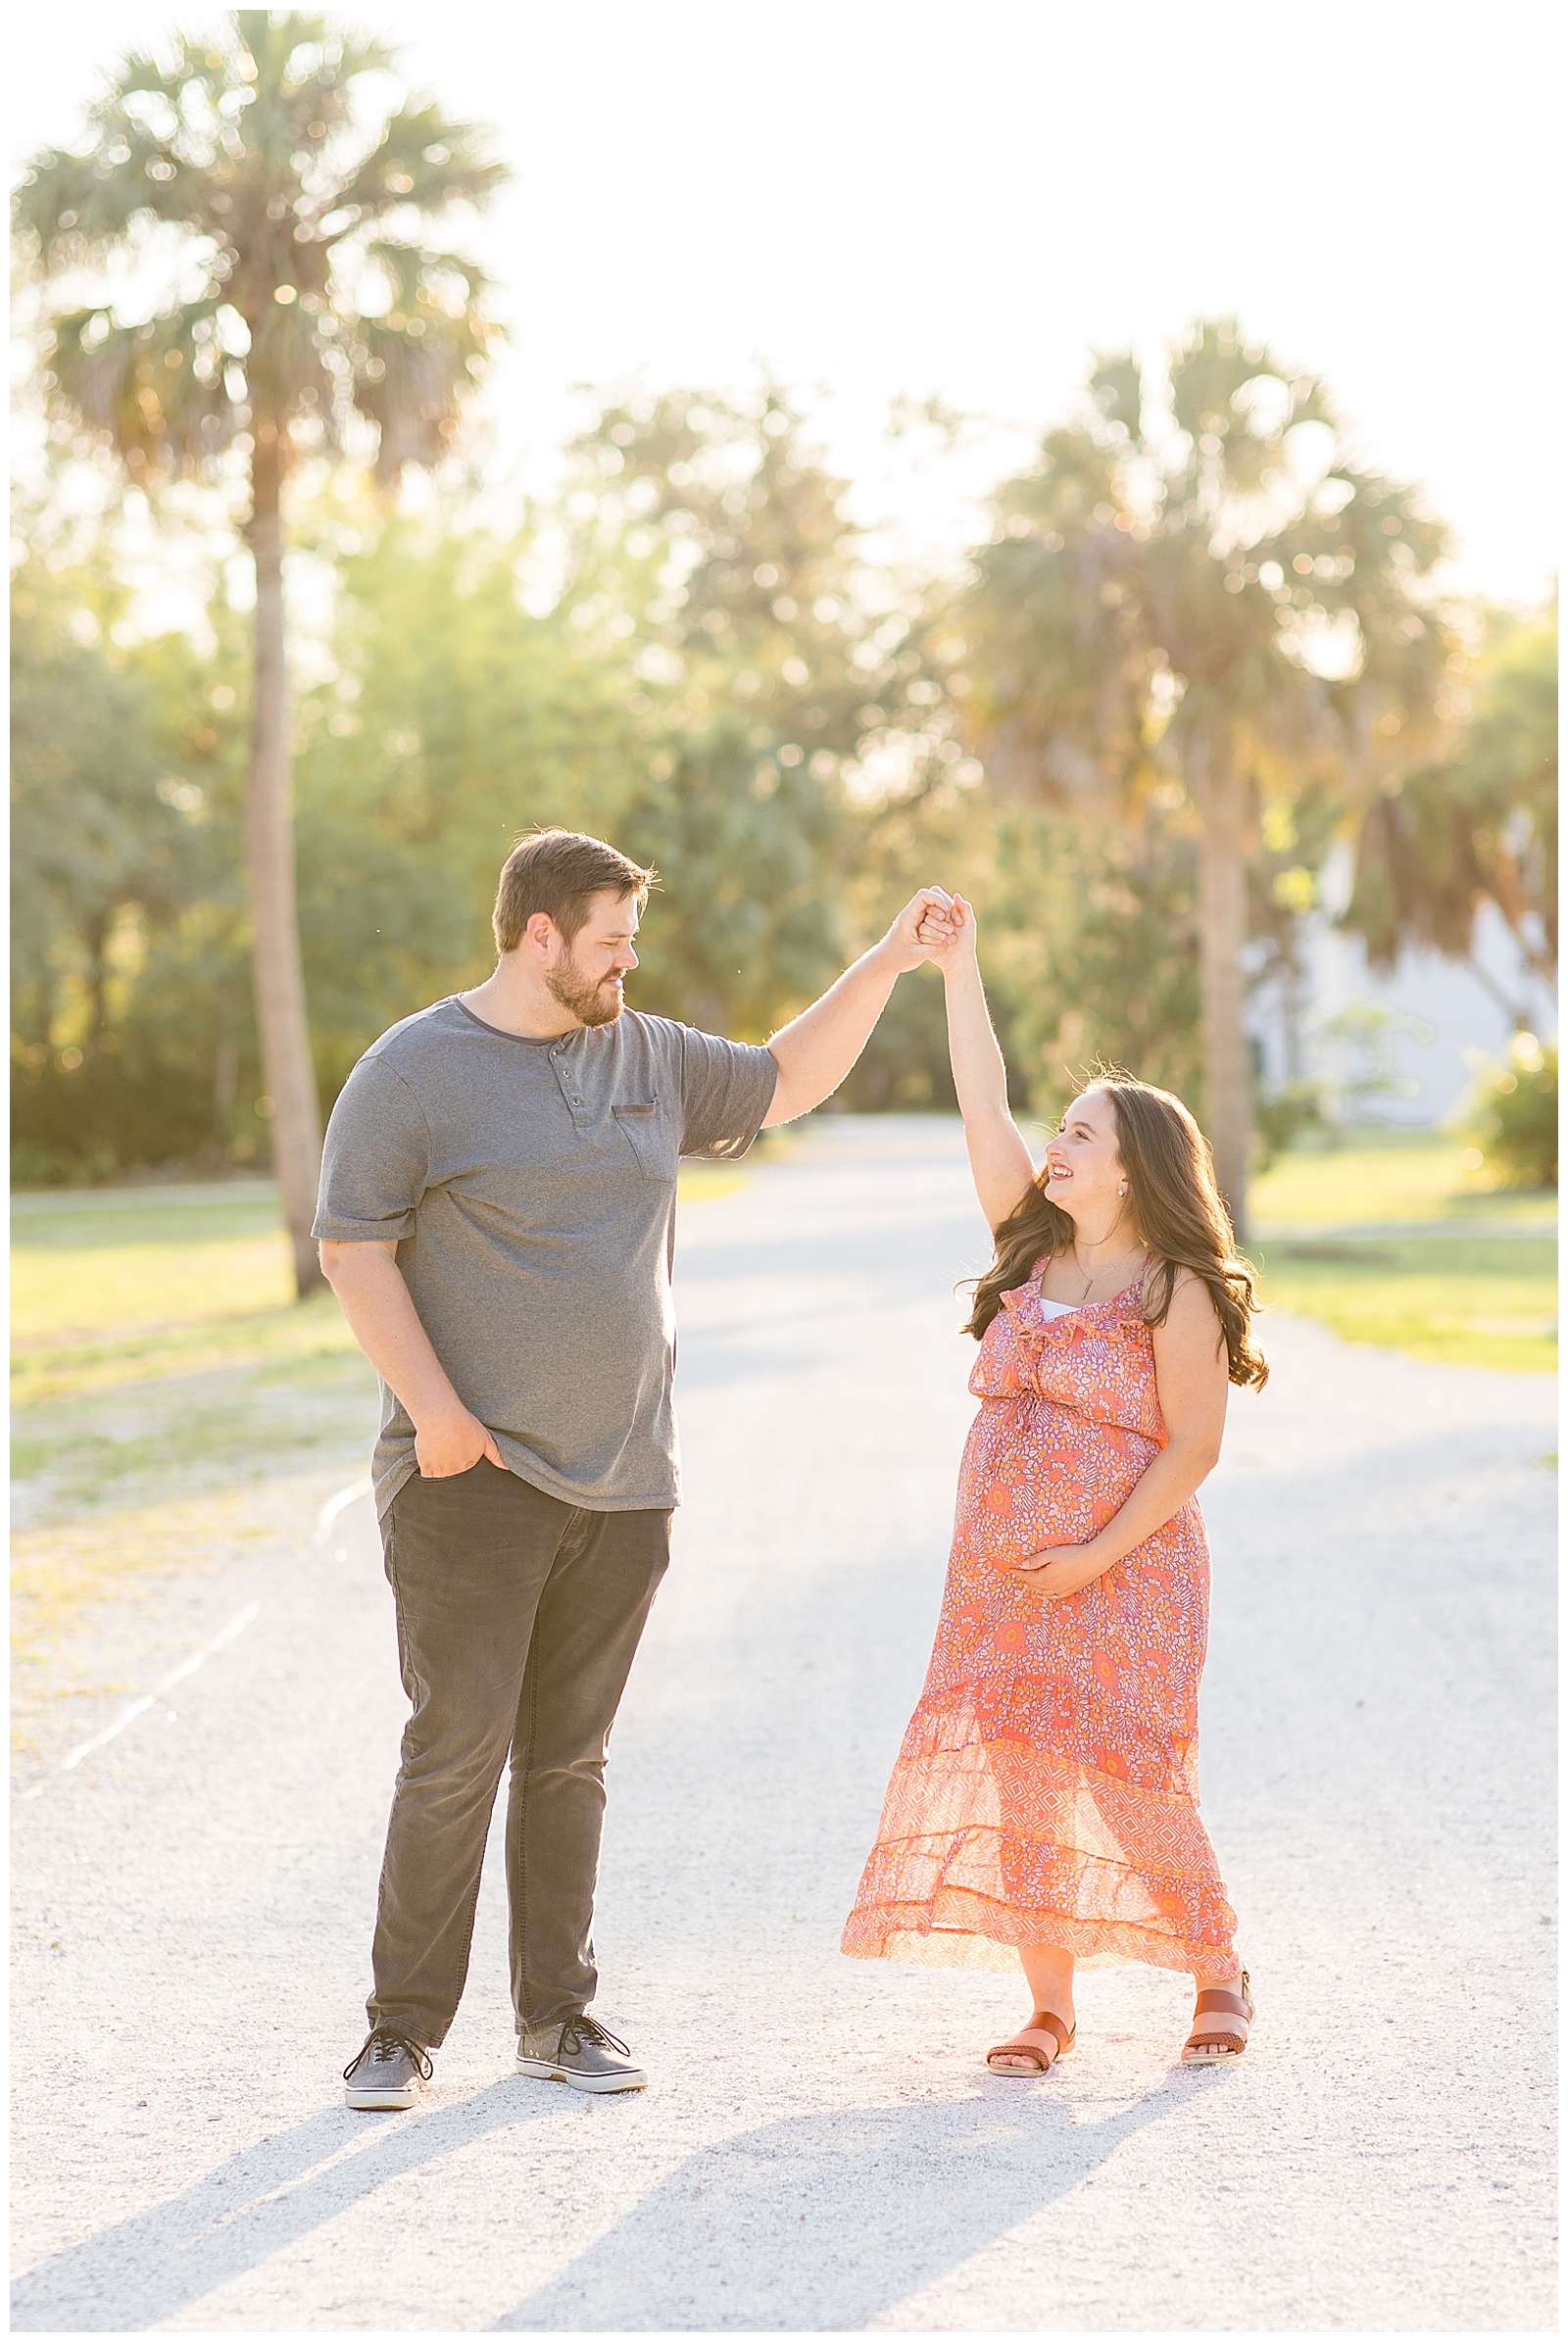 Pregnant momma and her husband stand in a neighborhood street in Florida and enjoy a dancing spin while they continue to look at each other!  This session was captured by Rebecca Rice Photography for her behind the scenes membership to see her in action as a photographer!  Click to see more of this couple on the blog today!
-rebeccaricephoto.com